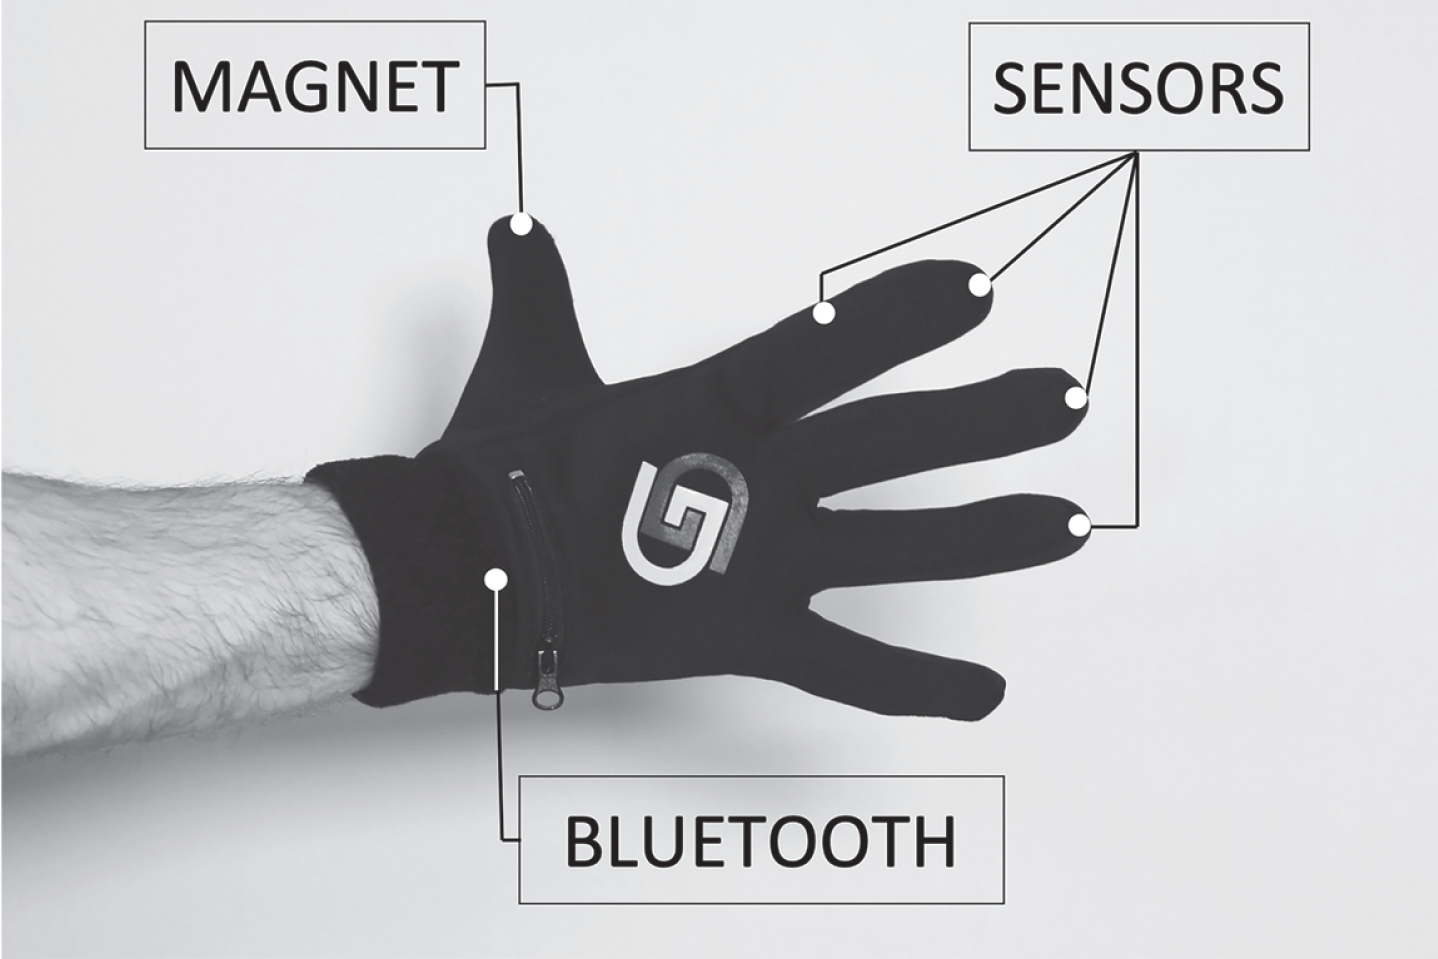 The GoGlove wearable device [28], which integrates sensors on fingertips for the recognition of single and double tap gestures and a Bluetooth module for wireless connection to other devices.